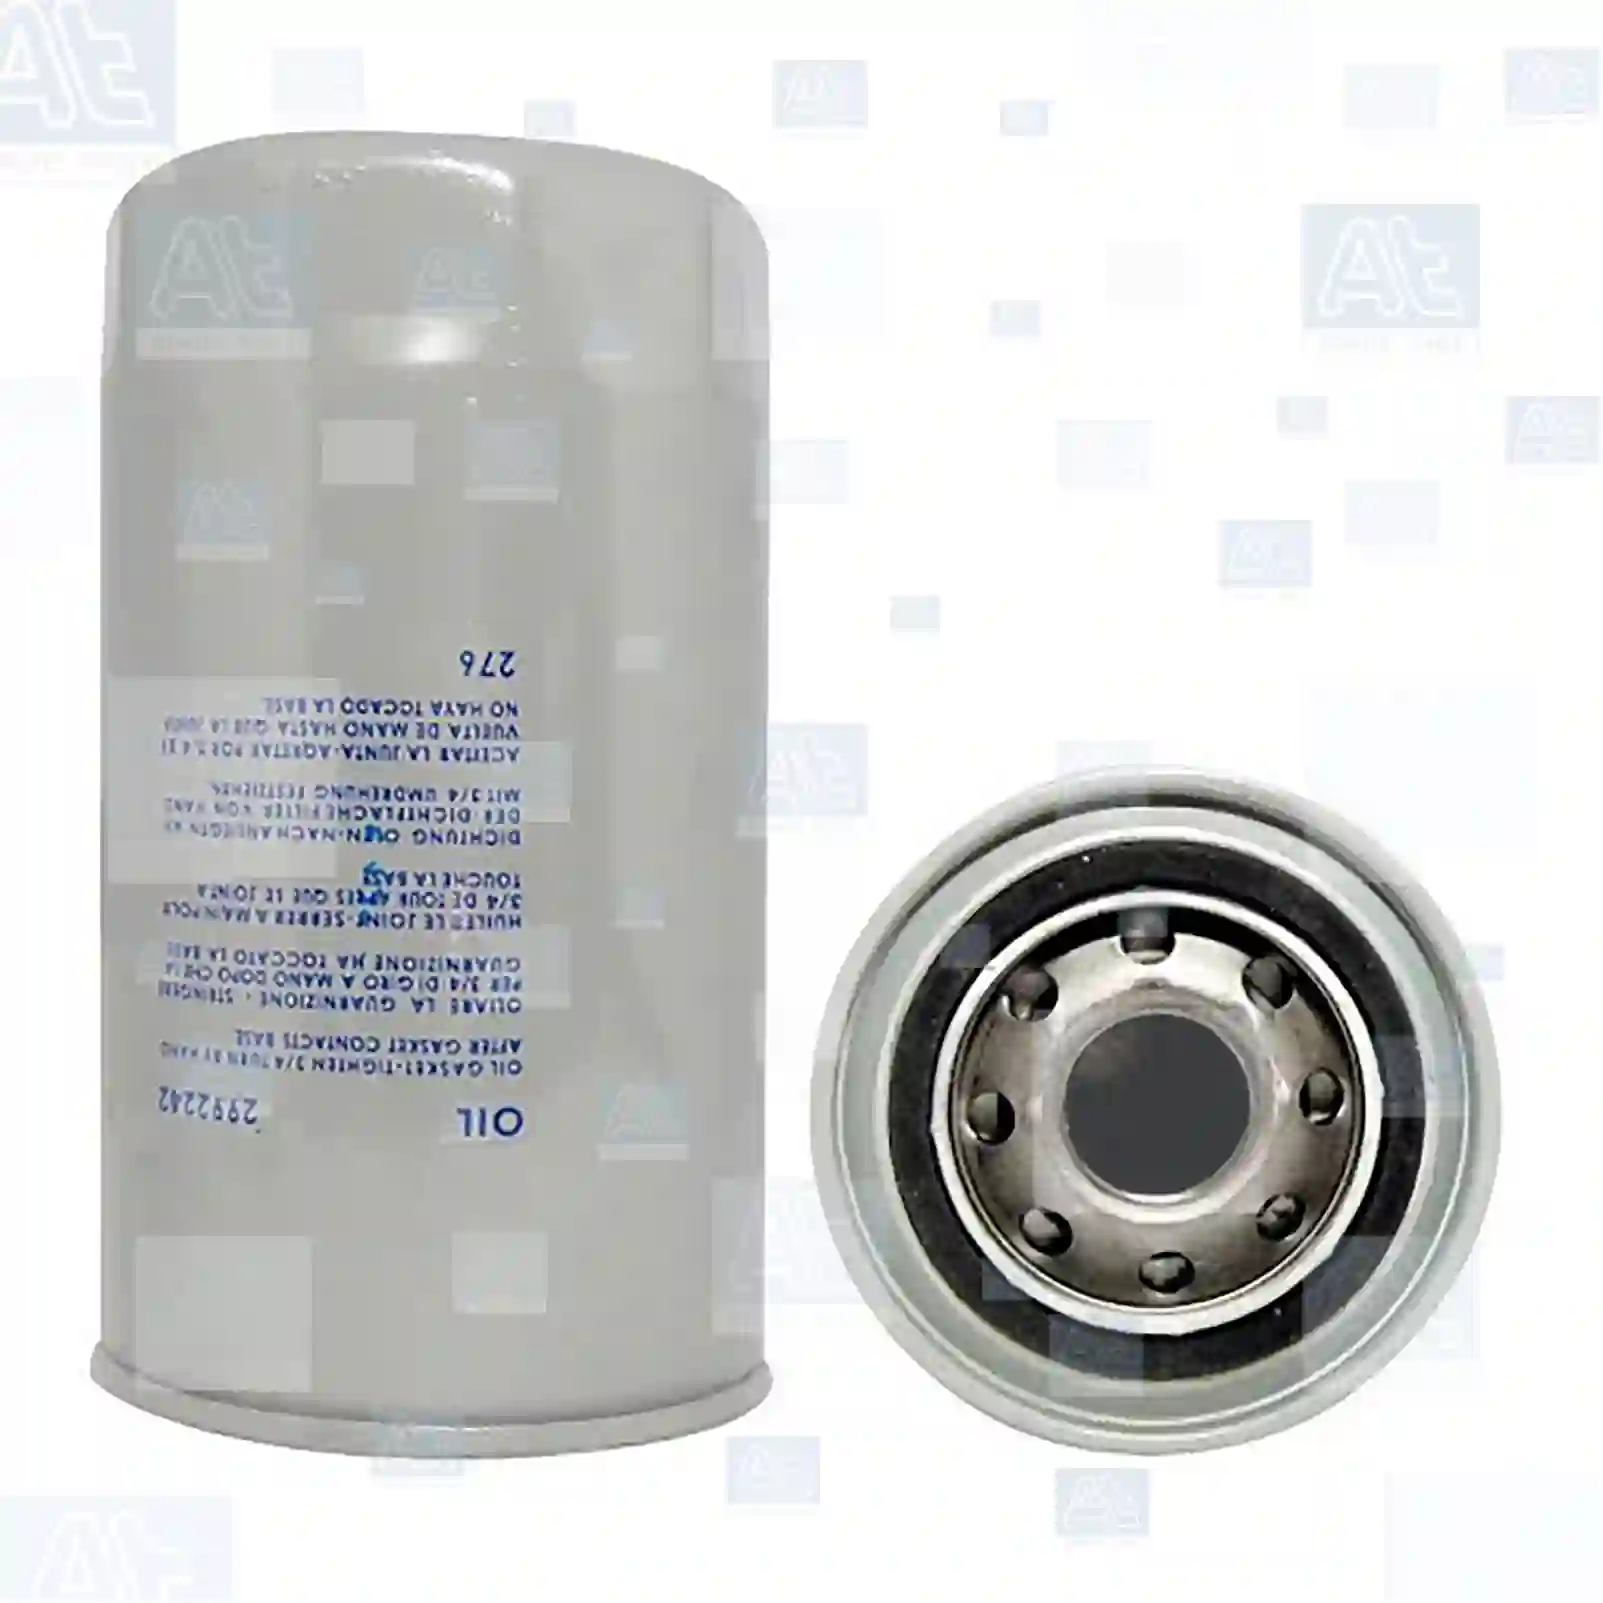 Oil filter, 77700882, 72516587, 402040222, 489789800, Z489789800, 84228510, 87803261, 4897898, 4989314, LF1601500, 402040222, Z489789800, 1399494, 1529642, 1706238, DP010205, 02992242, 04899566, 504033399, 504074043, BG5X-6731-AA, 3329105, 02943401, 02992242, 04899566, 2992242, 503120785, 503621940, 504033399, 504074043, 504118385, 87646666, 0281012005, K1399494PAC, 323017850, 323017850, 87803260MP, 87803260, 15208-LA40A, 15208-LA40B, 384240, 5021192695, 7424993654, 0120390146, 0120390154, 4897898, 0705031567, 15208LA40A, 20276815, 41501316, 2R0115403, ZG01709-0008 ||  77700882 At Spare Part | Engine, Accelerator Pedal, Camshaft, Connecting Rod, Crankcase, Crankshaft, Cylinder Head, Engine Suspension Mountings, Exhaust Manifold, Exhaust Gas Recirculation, Filter Kits, Flywheel Housing, General Overhaul Kits, Engine, Intake Manifold, Oil Cleaner, Oil Cooler, Oil Filter, Oil Pump, Oil Sump, Piston & Liner, Sensor & Switch, Timing Case, Turbocharger, Cooling System, Belt Tensioner, Coolant Filter, Coolant Pipe, Corrosion Prevention Agent, Drive, Expansion Tank, Fan, Intercooler, Monitors & Gauges, Radiator, Thermostat, V-Belt / Timing belt, Water Pump, Fuel System, Electronical Injector Unit, Feed Pump, Fuel Filter, cpl., Fuel Gauge Sender,  Fuel Line, Fuel Pump, Fuel Tank, Injection Line Kit, Injection Pump, Exhaust System, Clutch & Pedal, Gearbox, Propeller Shaft, Axles, Brake System, Hubs & Wheels, Suspension, Leaf Spring, Universal Parts / Accessories, Steering, Electrical System, Cabin Oil filter, 77700882, 72516587, 402040222, 489789800, Z489789800, 84228510, 87803261, 4897898, 4989314, LF1601500, 402040222, Z489789800, 1399494, 1529642, 1706238, DP010205, 02992242, 04899566, 504033399, 504074043, BG5X-6731-AA, 3329105, 02943401, 02992242, 04899566, 2992242, 503120785, 503621940, 504033399, 504074043, 504118385, 87646666, 0281012005, K1399494PAC, 323017850, 323017850, 87803260MP, 87803260, 15208-LA40A, 15208-LA40B, 384240, 5021192695, 7424993654, 0120390146, 0120390154, 4897898, 0705031567, 15208LA40A, 20276815, 41501316, 2R0115403, ZG01709-0008 ||  77700882 At Spare Part | Engine, Accelerator Pedal, Camshaft, Connecting Rod, Crankcase, Crankshaft, Cylinder Head, Engine Suspension Mountings, Exhaust Manifold, Exhaust Gas Recirculation, Filter Kits, Flywheel Housing, General Overhaul Kits, Engine, Intake Manifold, Oil Cleaner, Oil Cooler, Oil Filter, Oil Pump, Oil Sump, Piston & Liner, Sensor & Switch, Timing Case, Turbocharger, Cooling System, Belt Tensioner, Coolant Filter, Coolant Pipe, Corrosion Prevention Agent, Drive, Expansion Tank, Fan, Intercooler, Monitors & Gauges, Radiator, Thermostat, V-Belt / Timing belt, Water Pump, Fuel System, Electronical Injector Unit, Feed Pump, Fuel Filter, cpl., Fuel Gauge Sender,  Fuel Line, Fuel Pump, Fuel Tank, Injection Line Kit, Injection Pump, Exhaust System, Clutch & Pedal, Gearbox, Propeller Shaft, Axles, Brake System, Hubs & Wheels, Suspension, Leaf Spring, Universal Parts / Accessories, Steering, Electrical System, Cabin